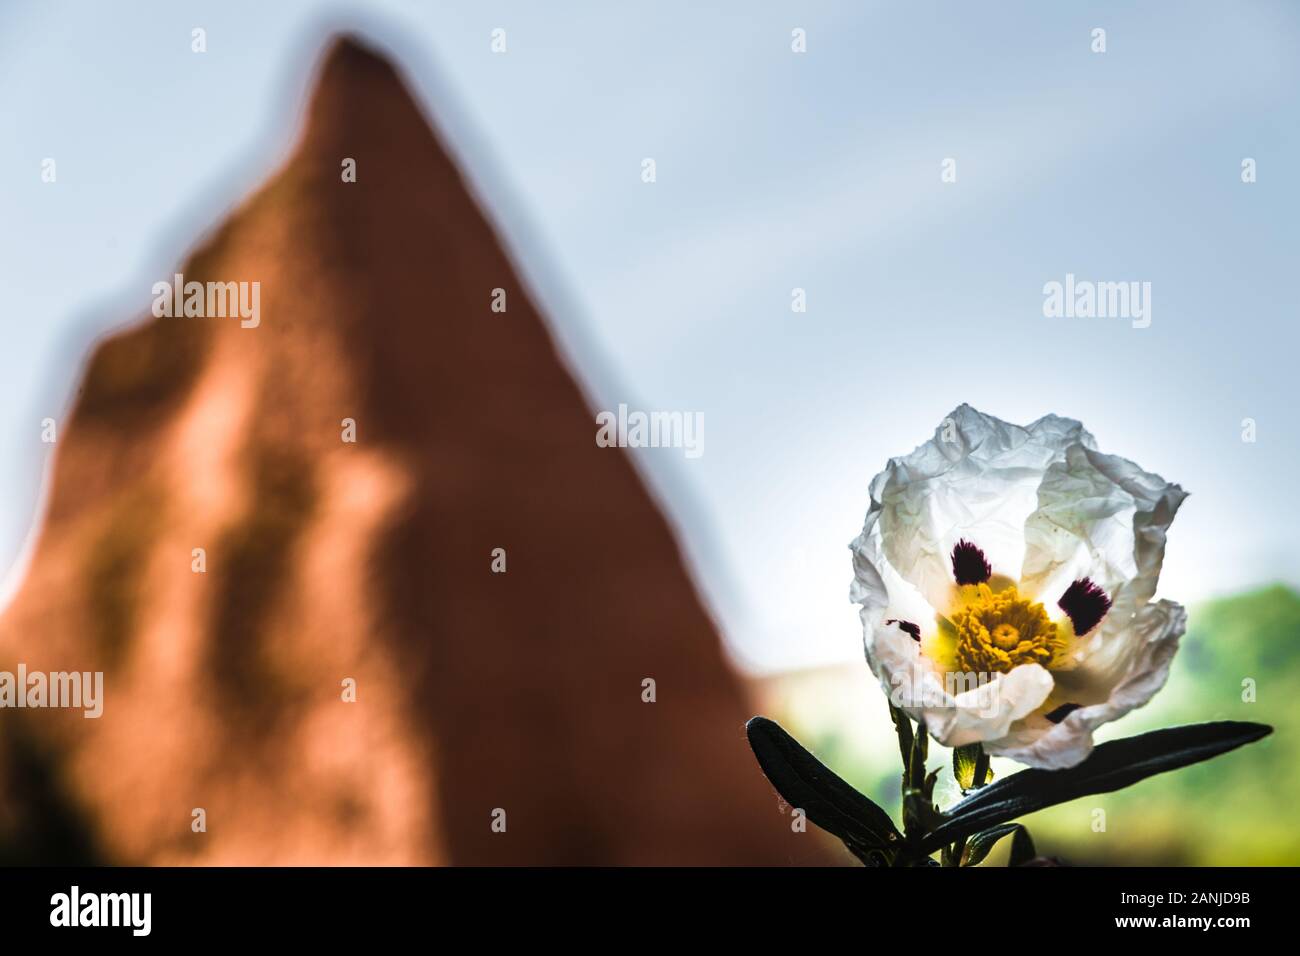 View of a Jara flower with the mountains of Las Medulas in the background. Stock Photo